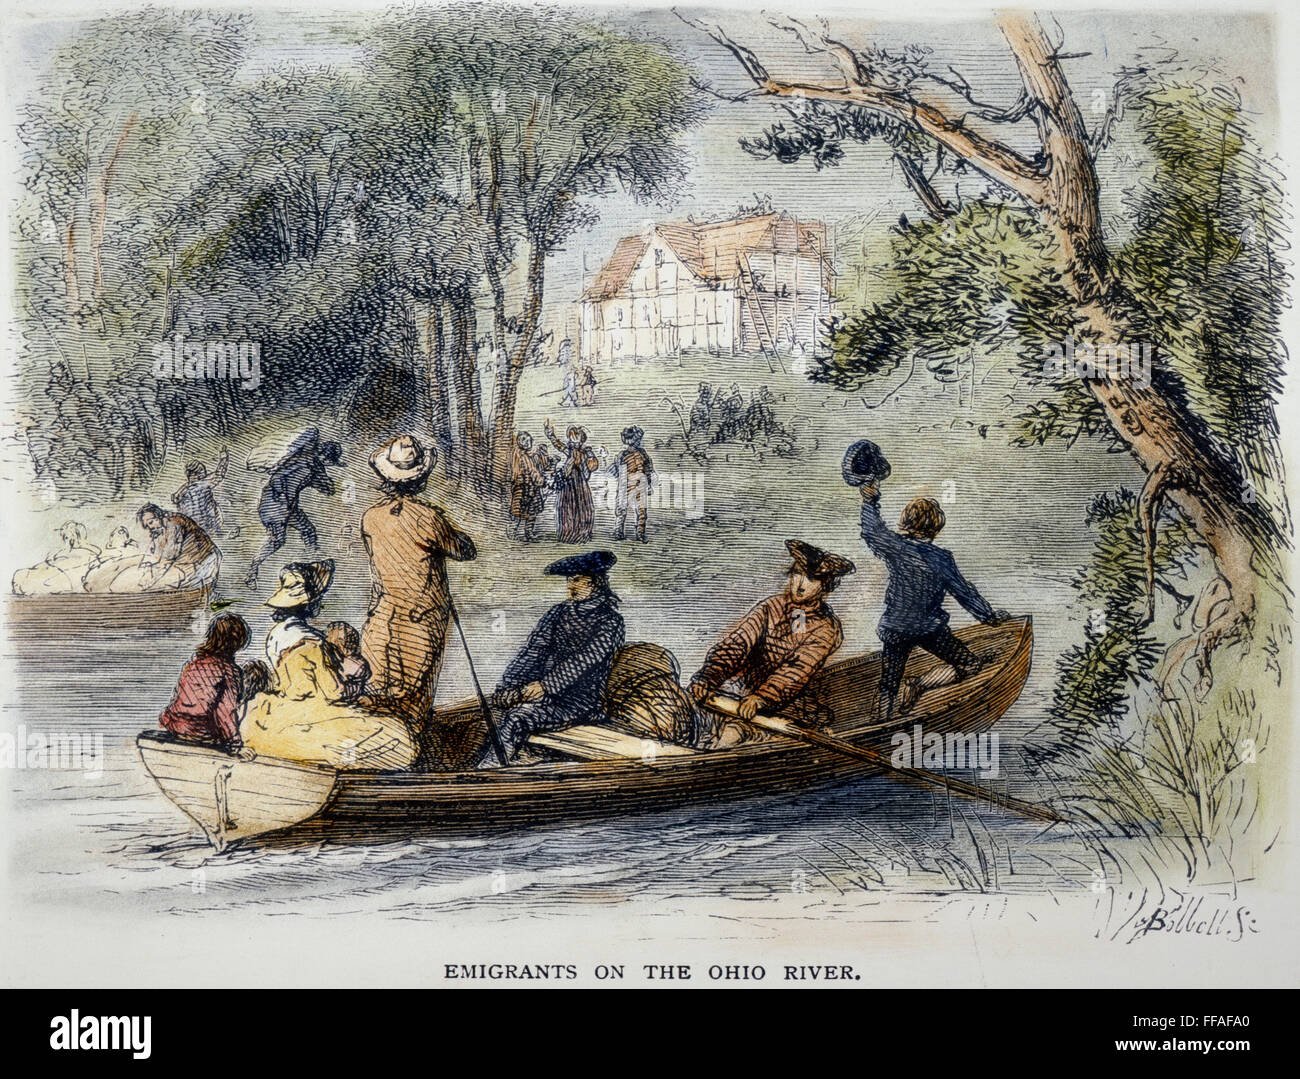 EMIGRANTS TO OHIO, 1789./nEmigrants from east of the Allegheny Mountains arrive at a new settlement on the banks of the Ohio River, c1789: wood engraving, 19th century, after Felix O.C. Darley. Stock Photo